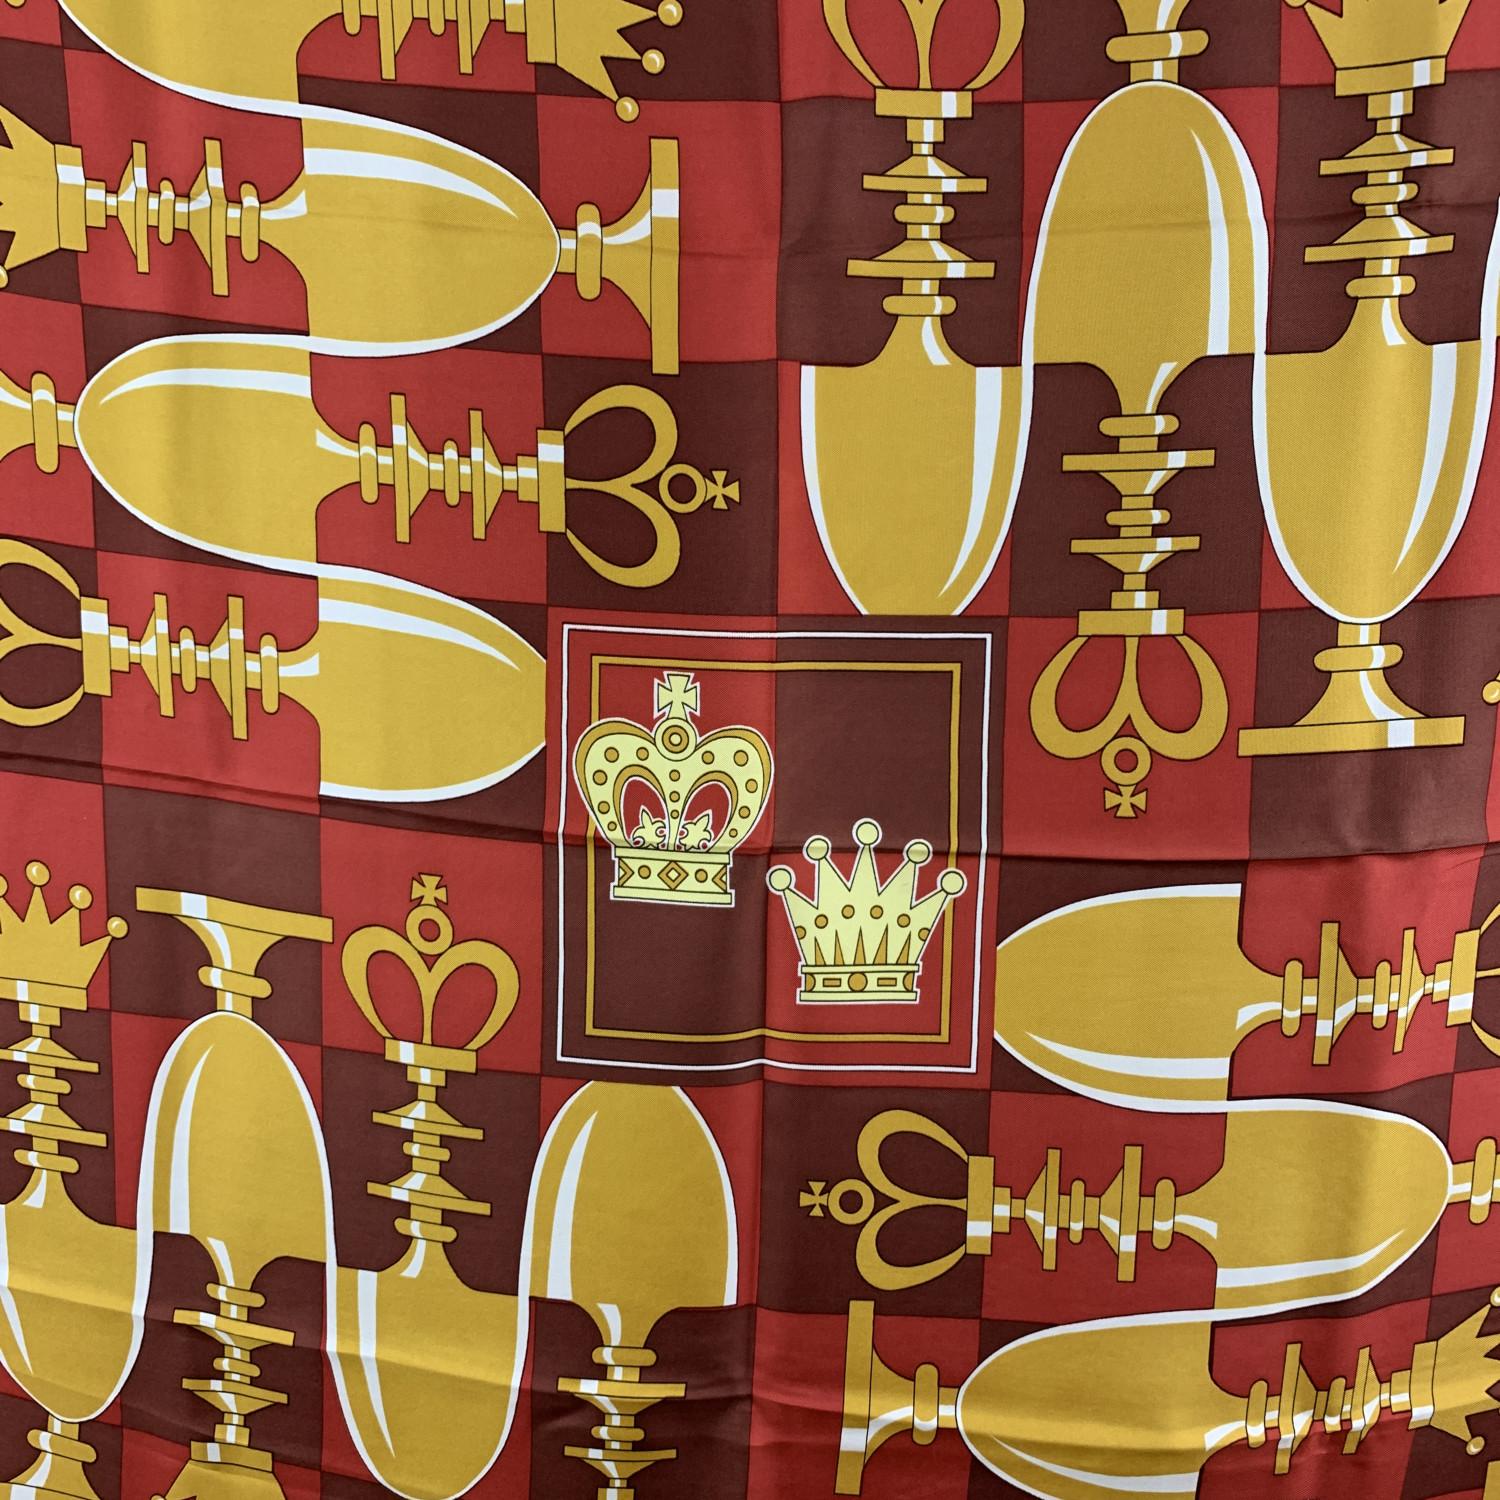 Beautiful Hermes 'Echecs II / Echiquier' silk scarf by Pierre Peron, originally issued in 1974. It has re-issued many times in different colours, formats and variations of. Main color are red, brown and yellow gold. The scarf depicts a chessboard